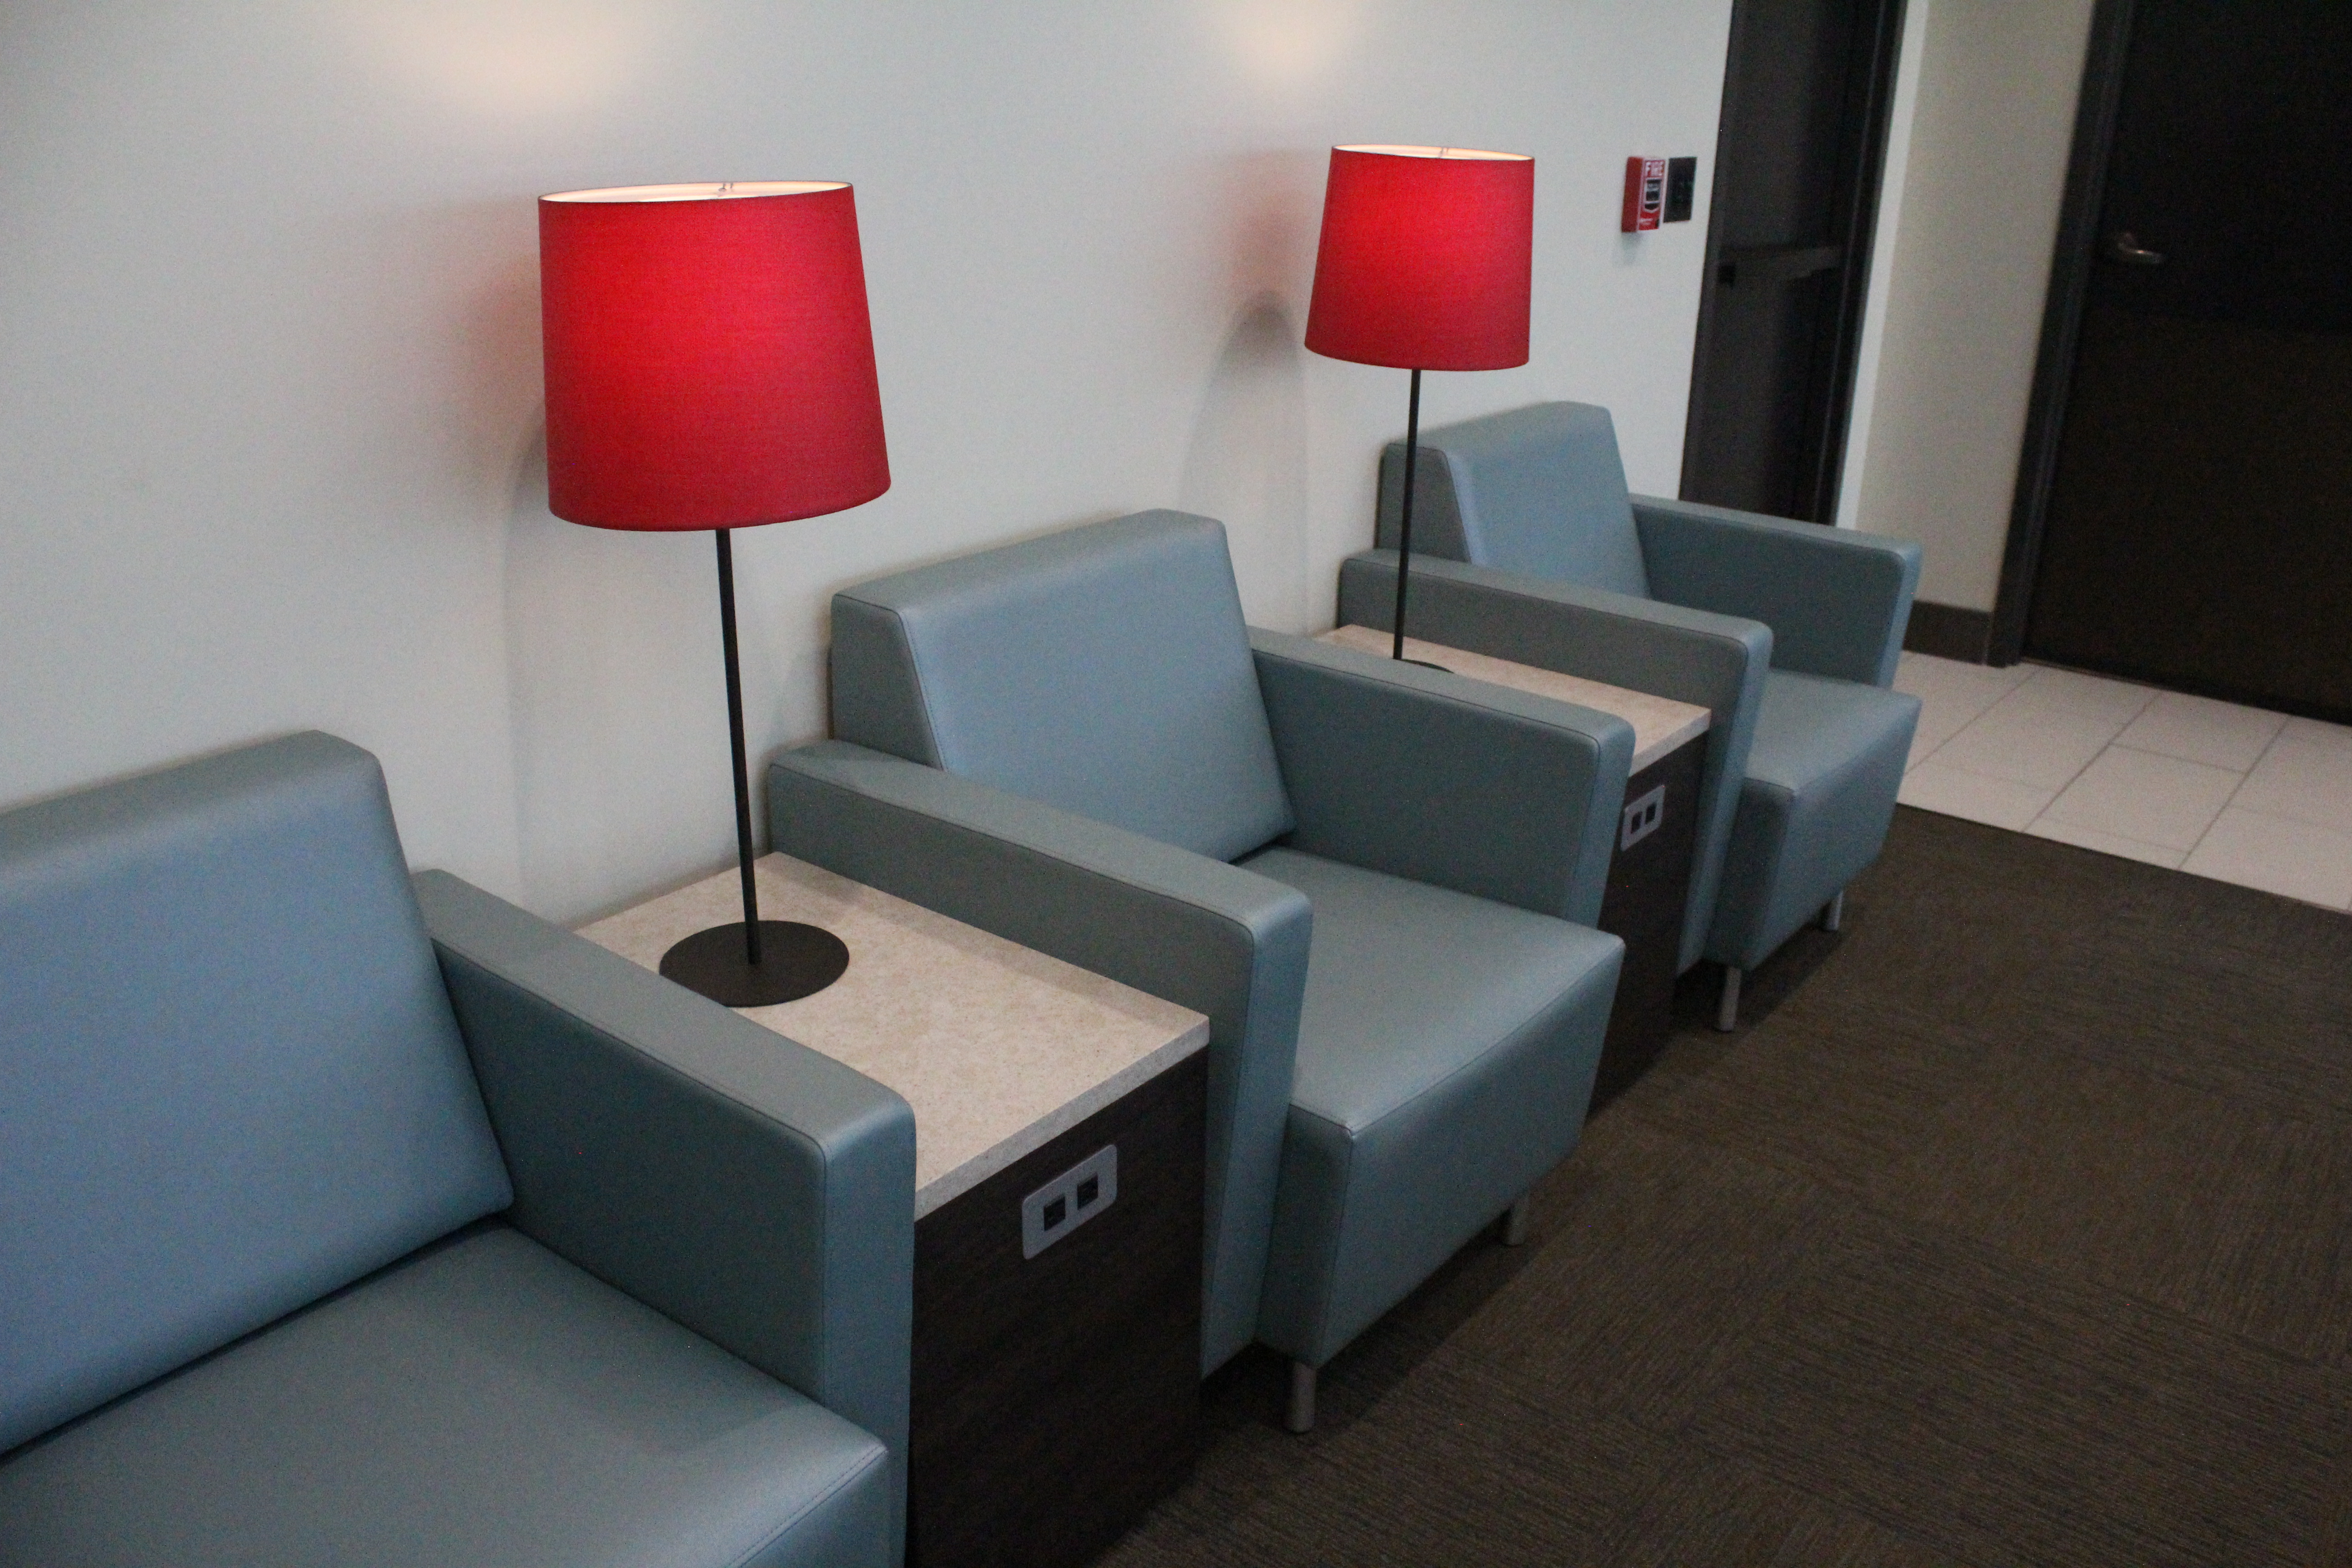 Additional lounge seating at the Wingtips Lounge St. Louis